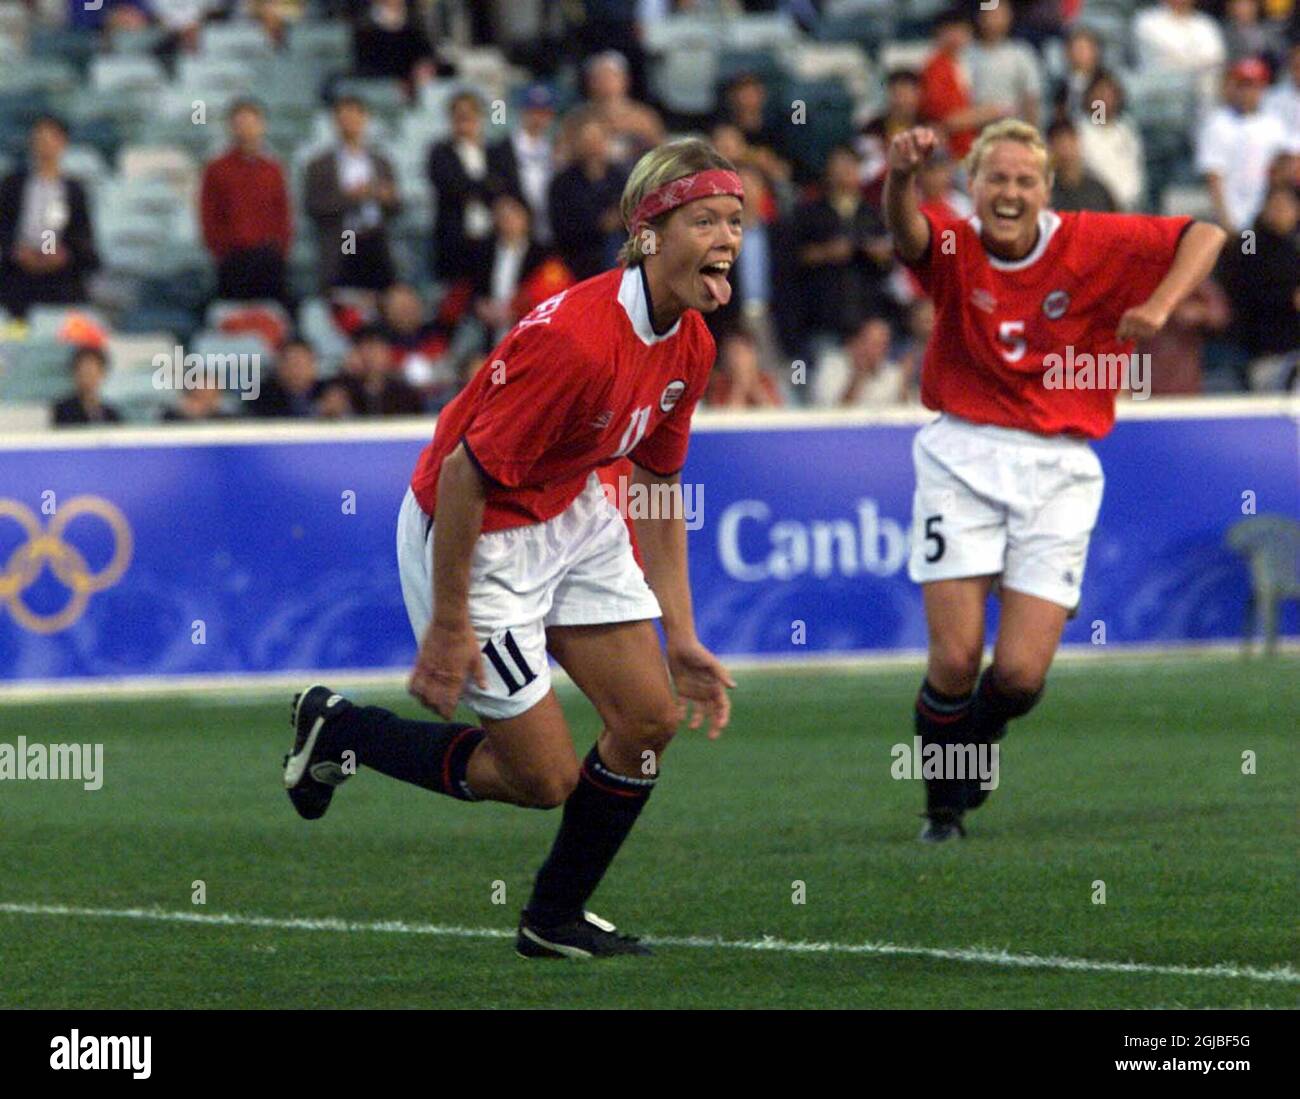 Norway's Marianne Pettersen celebrates after putting her team 1-0 up against the tournament favourites   Stock Photo